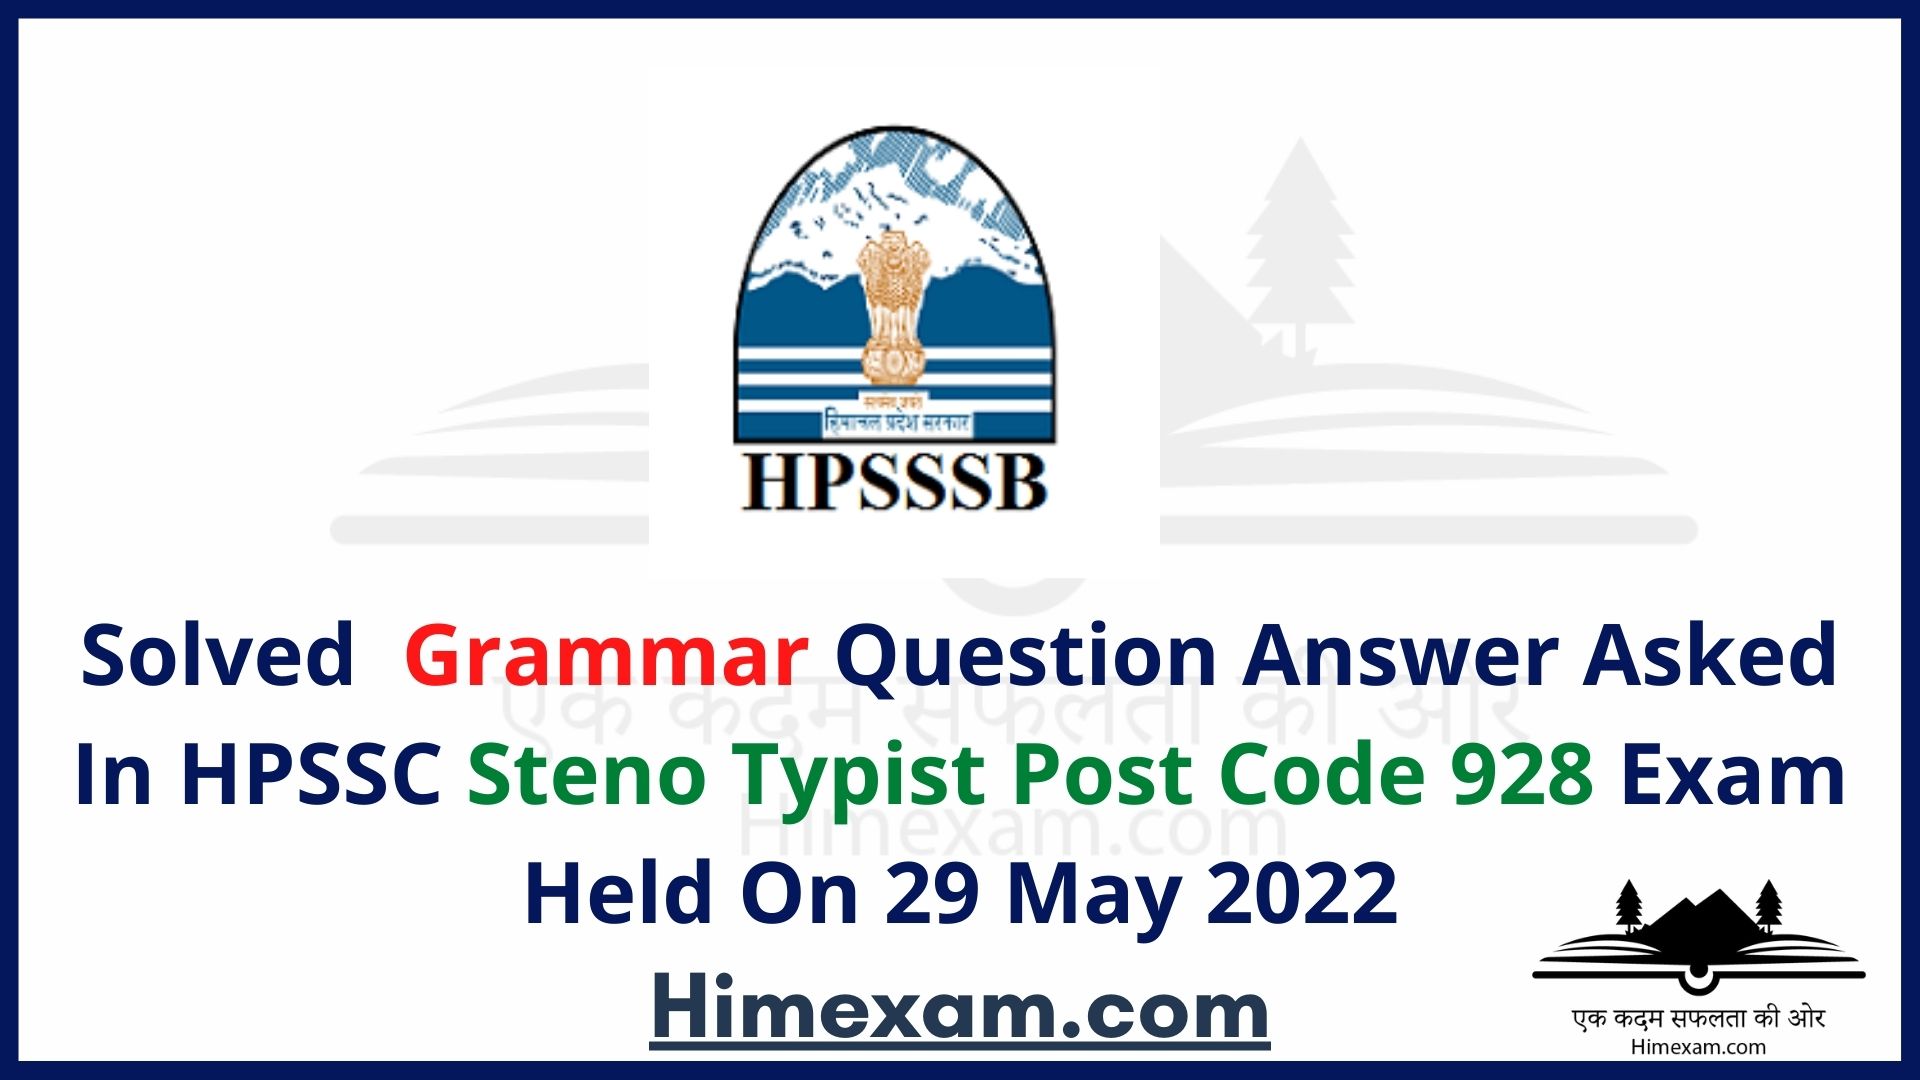 Solved Grammar Question Answer Asked In HPSSC Steno Typist Post Code 928 Exam Held On 29 May 2022